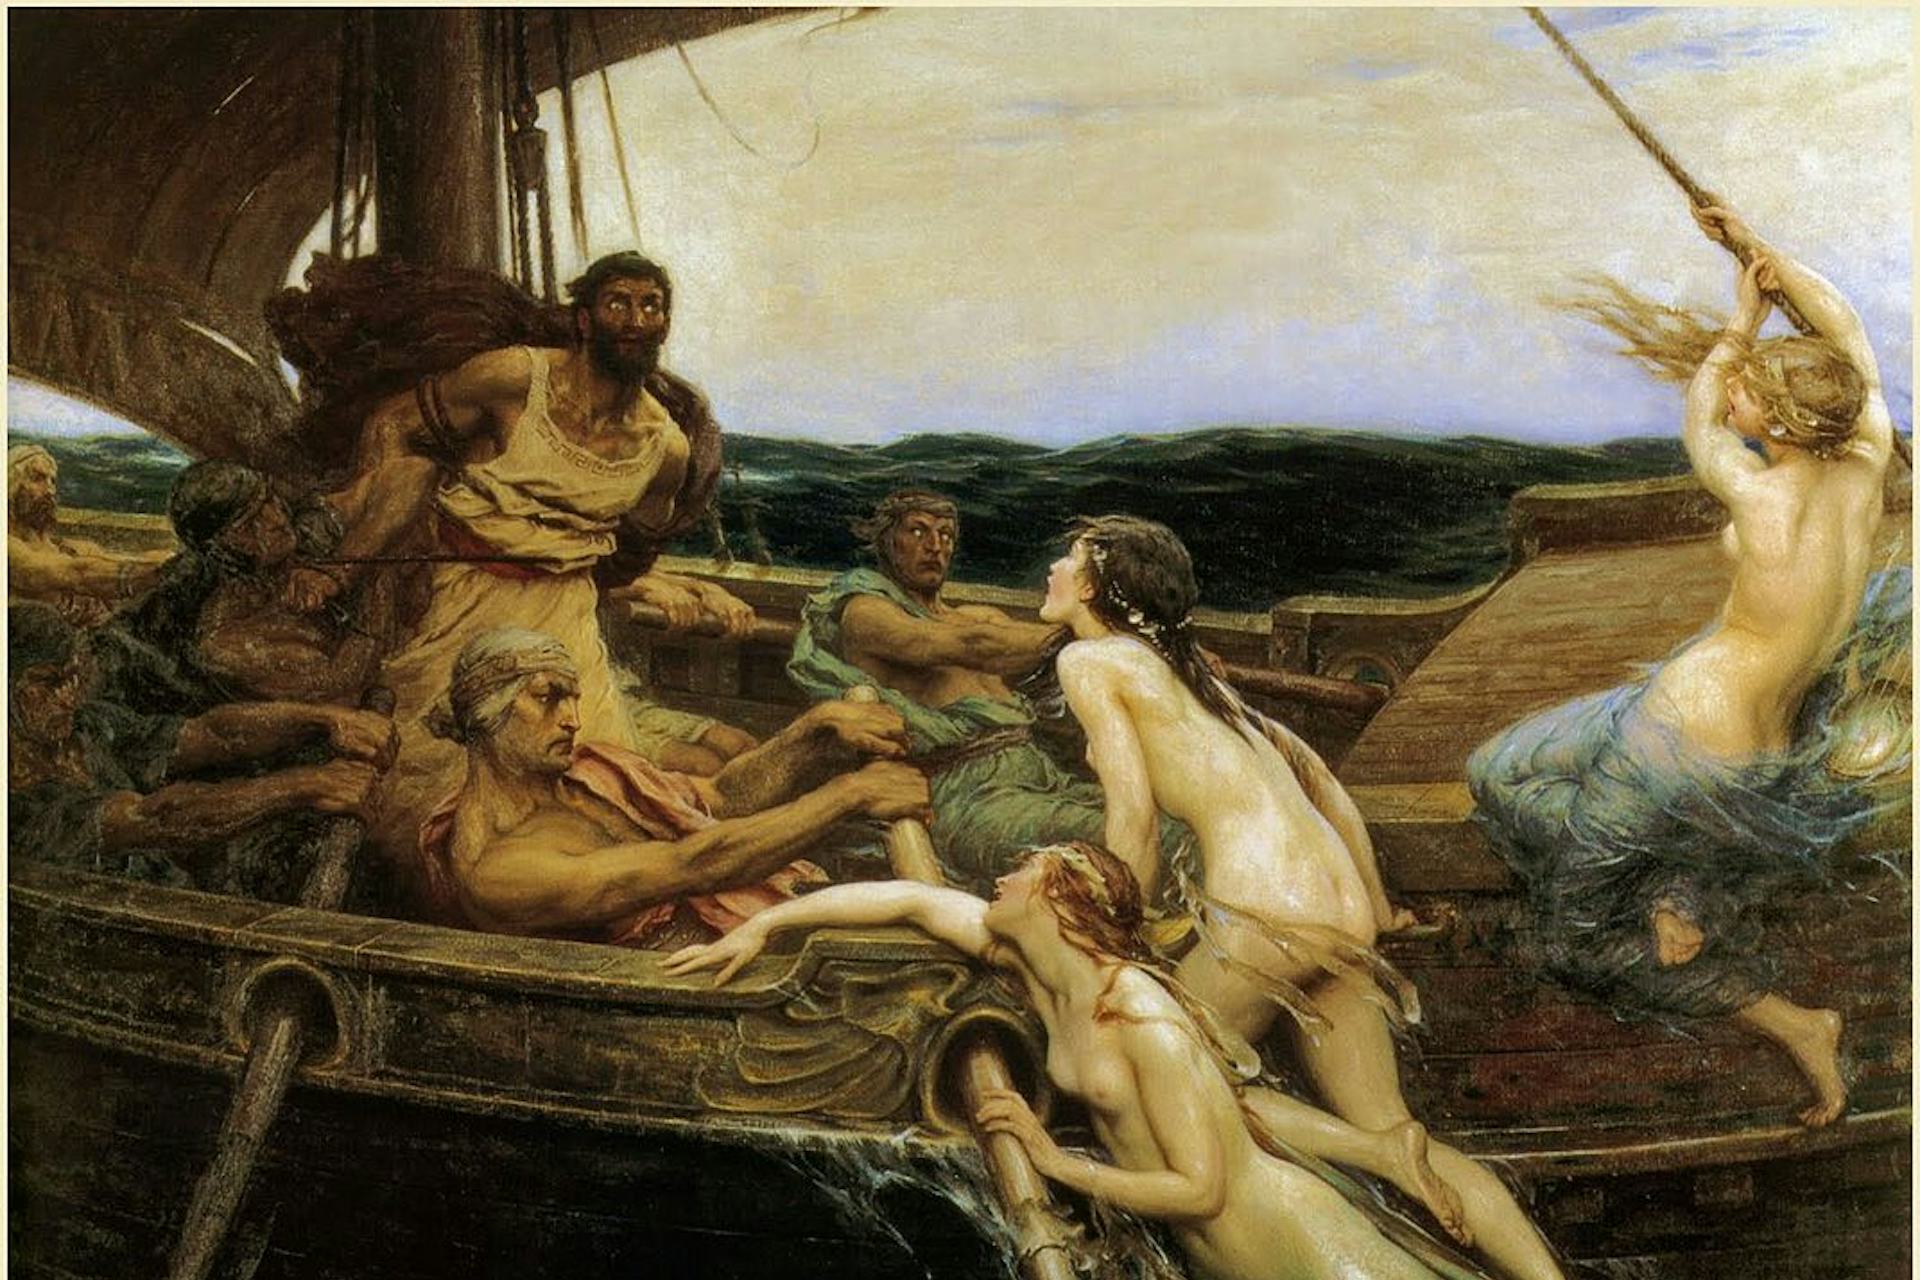 Ulysses and the Sirens by Herbert James Draper